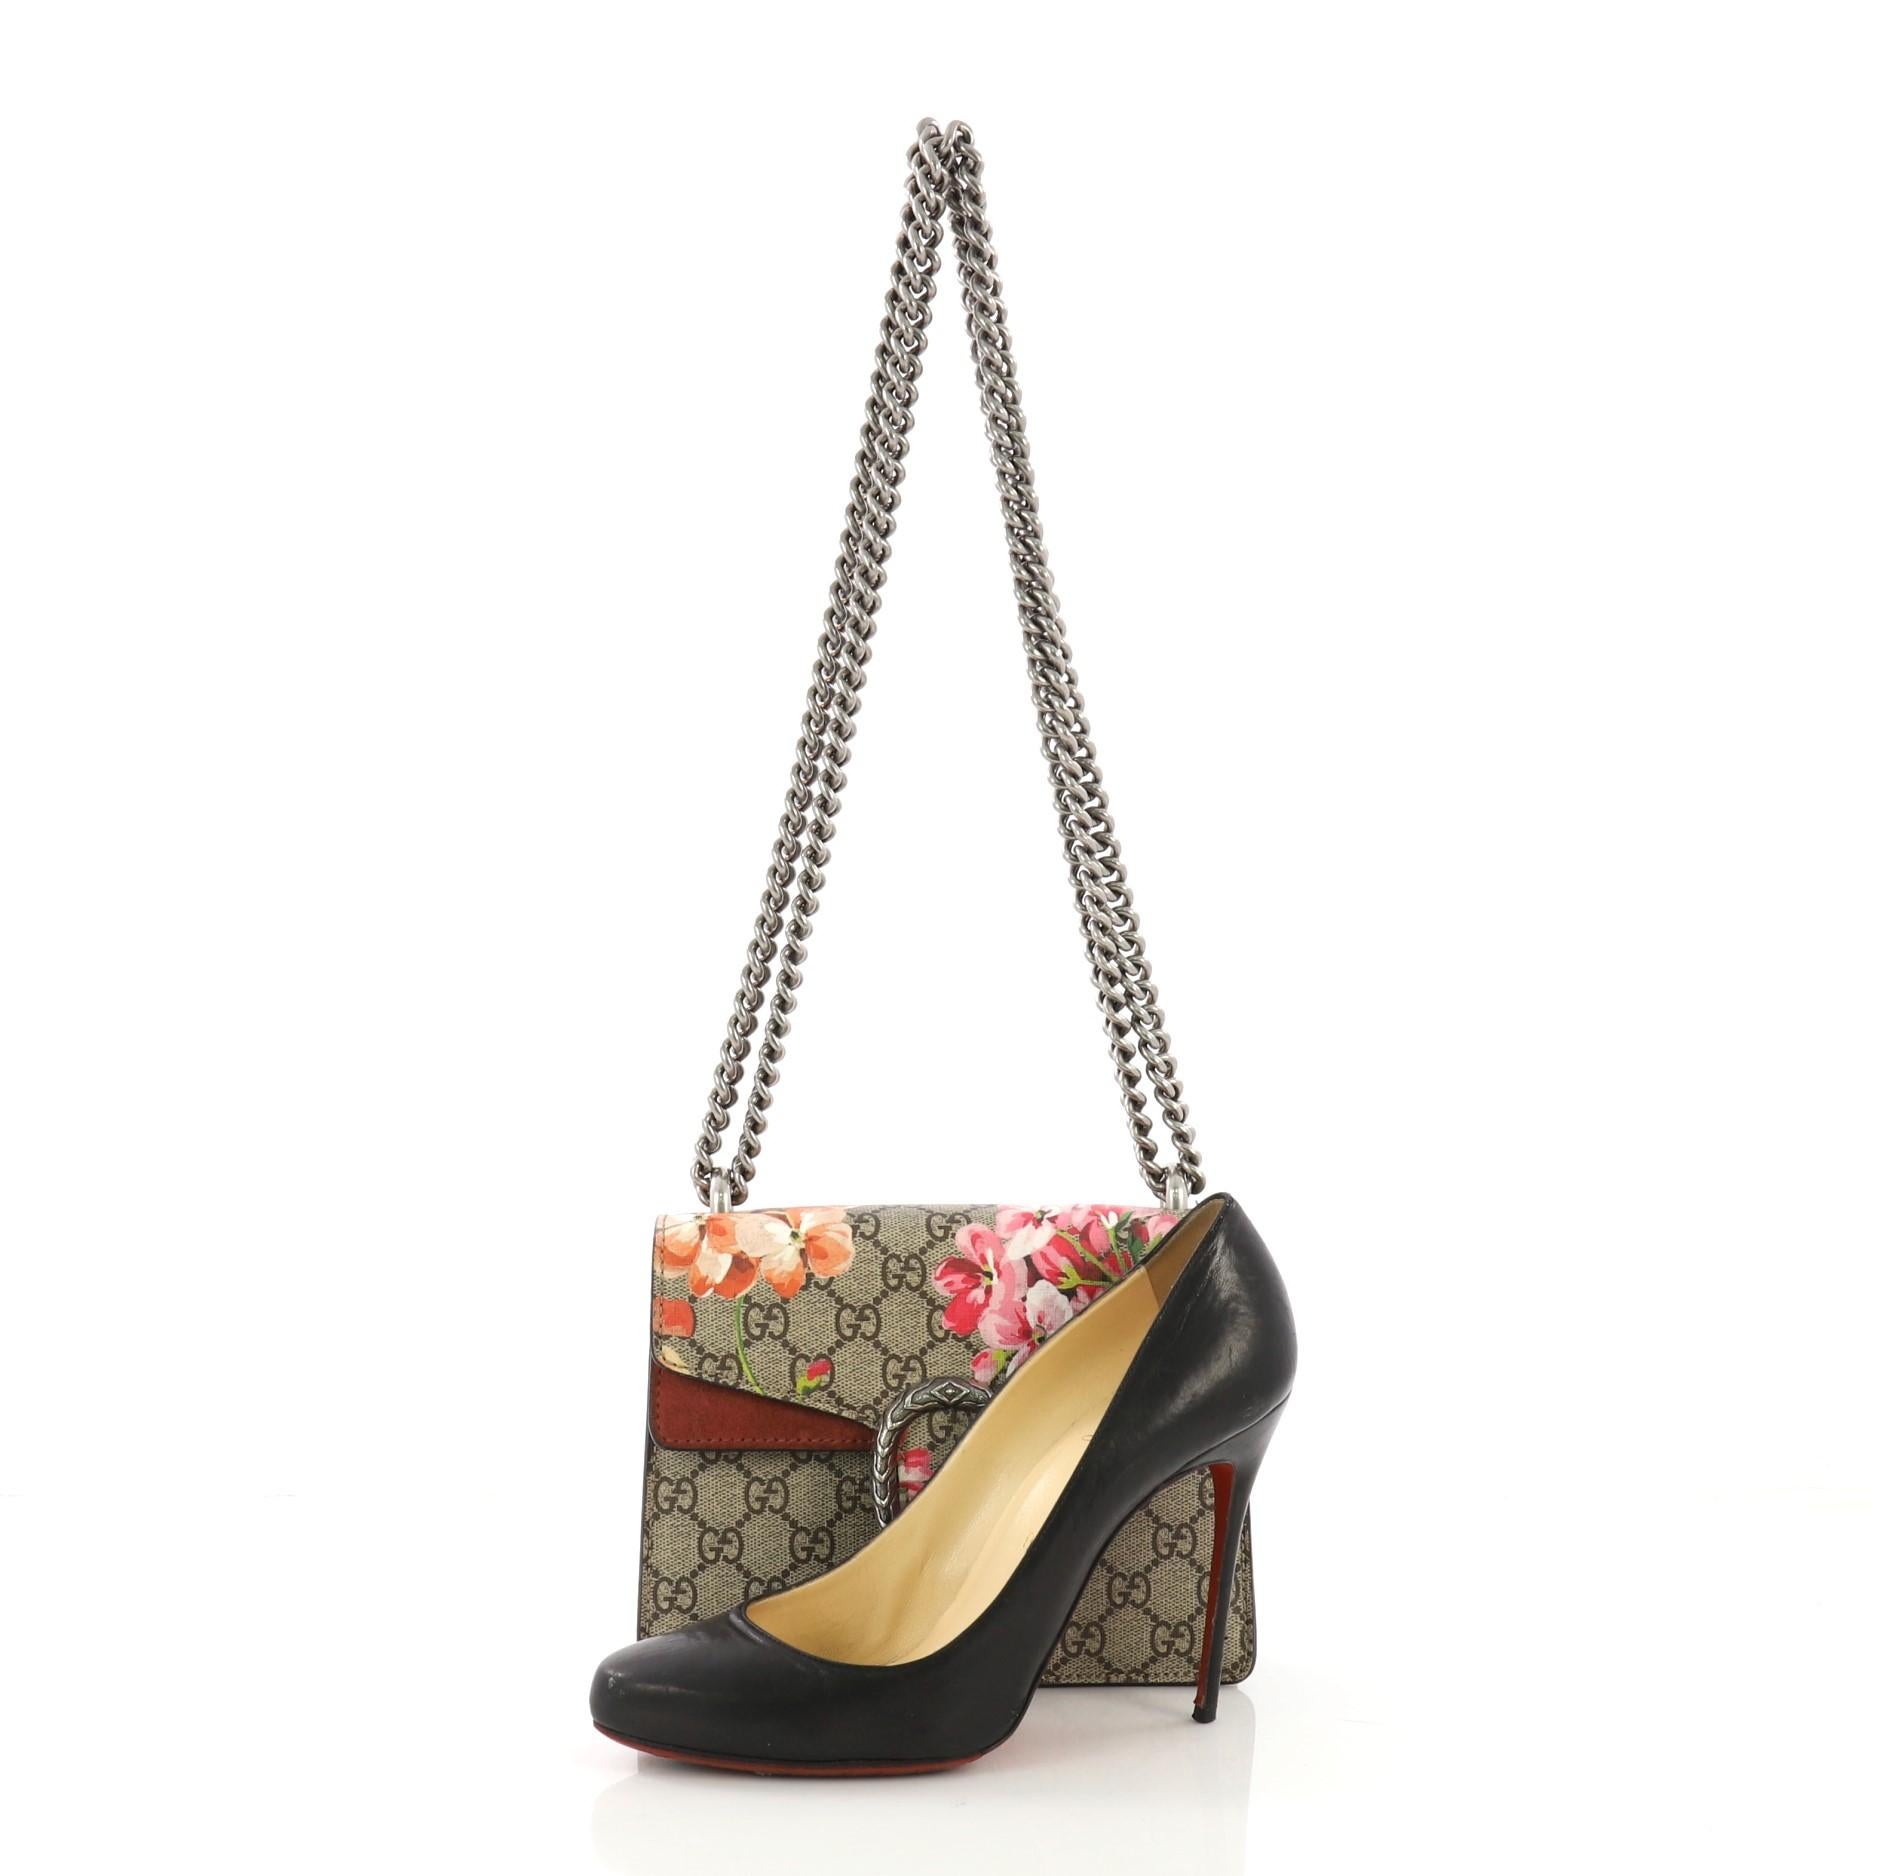 This Gucci Dionysus Handbag Blooms Print GG Coated Canvas Mini, crafted from beige blooms print GG coated canvas, features sliding chain strap, tiger head spur, and aged silver-tone hardware. Its pin closure opens to a purple suede interior. **Note: